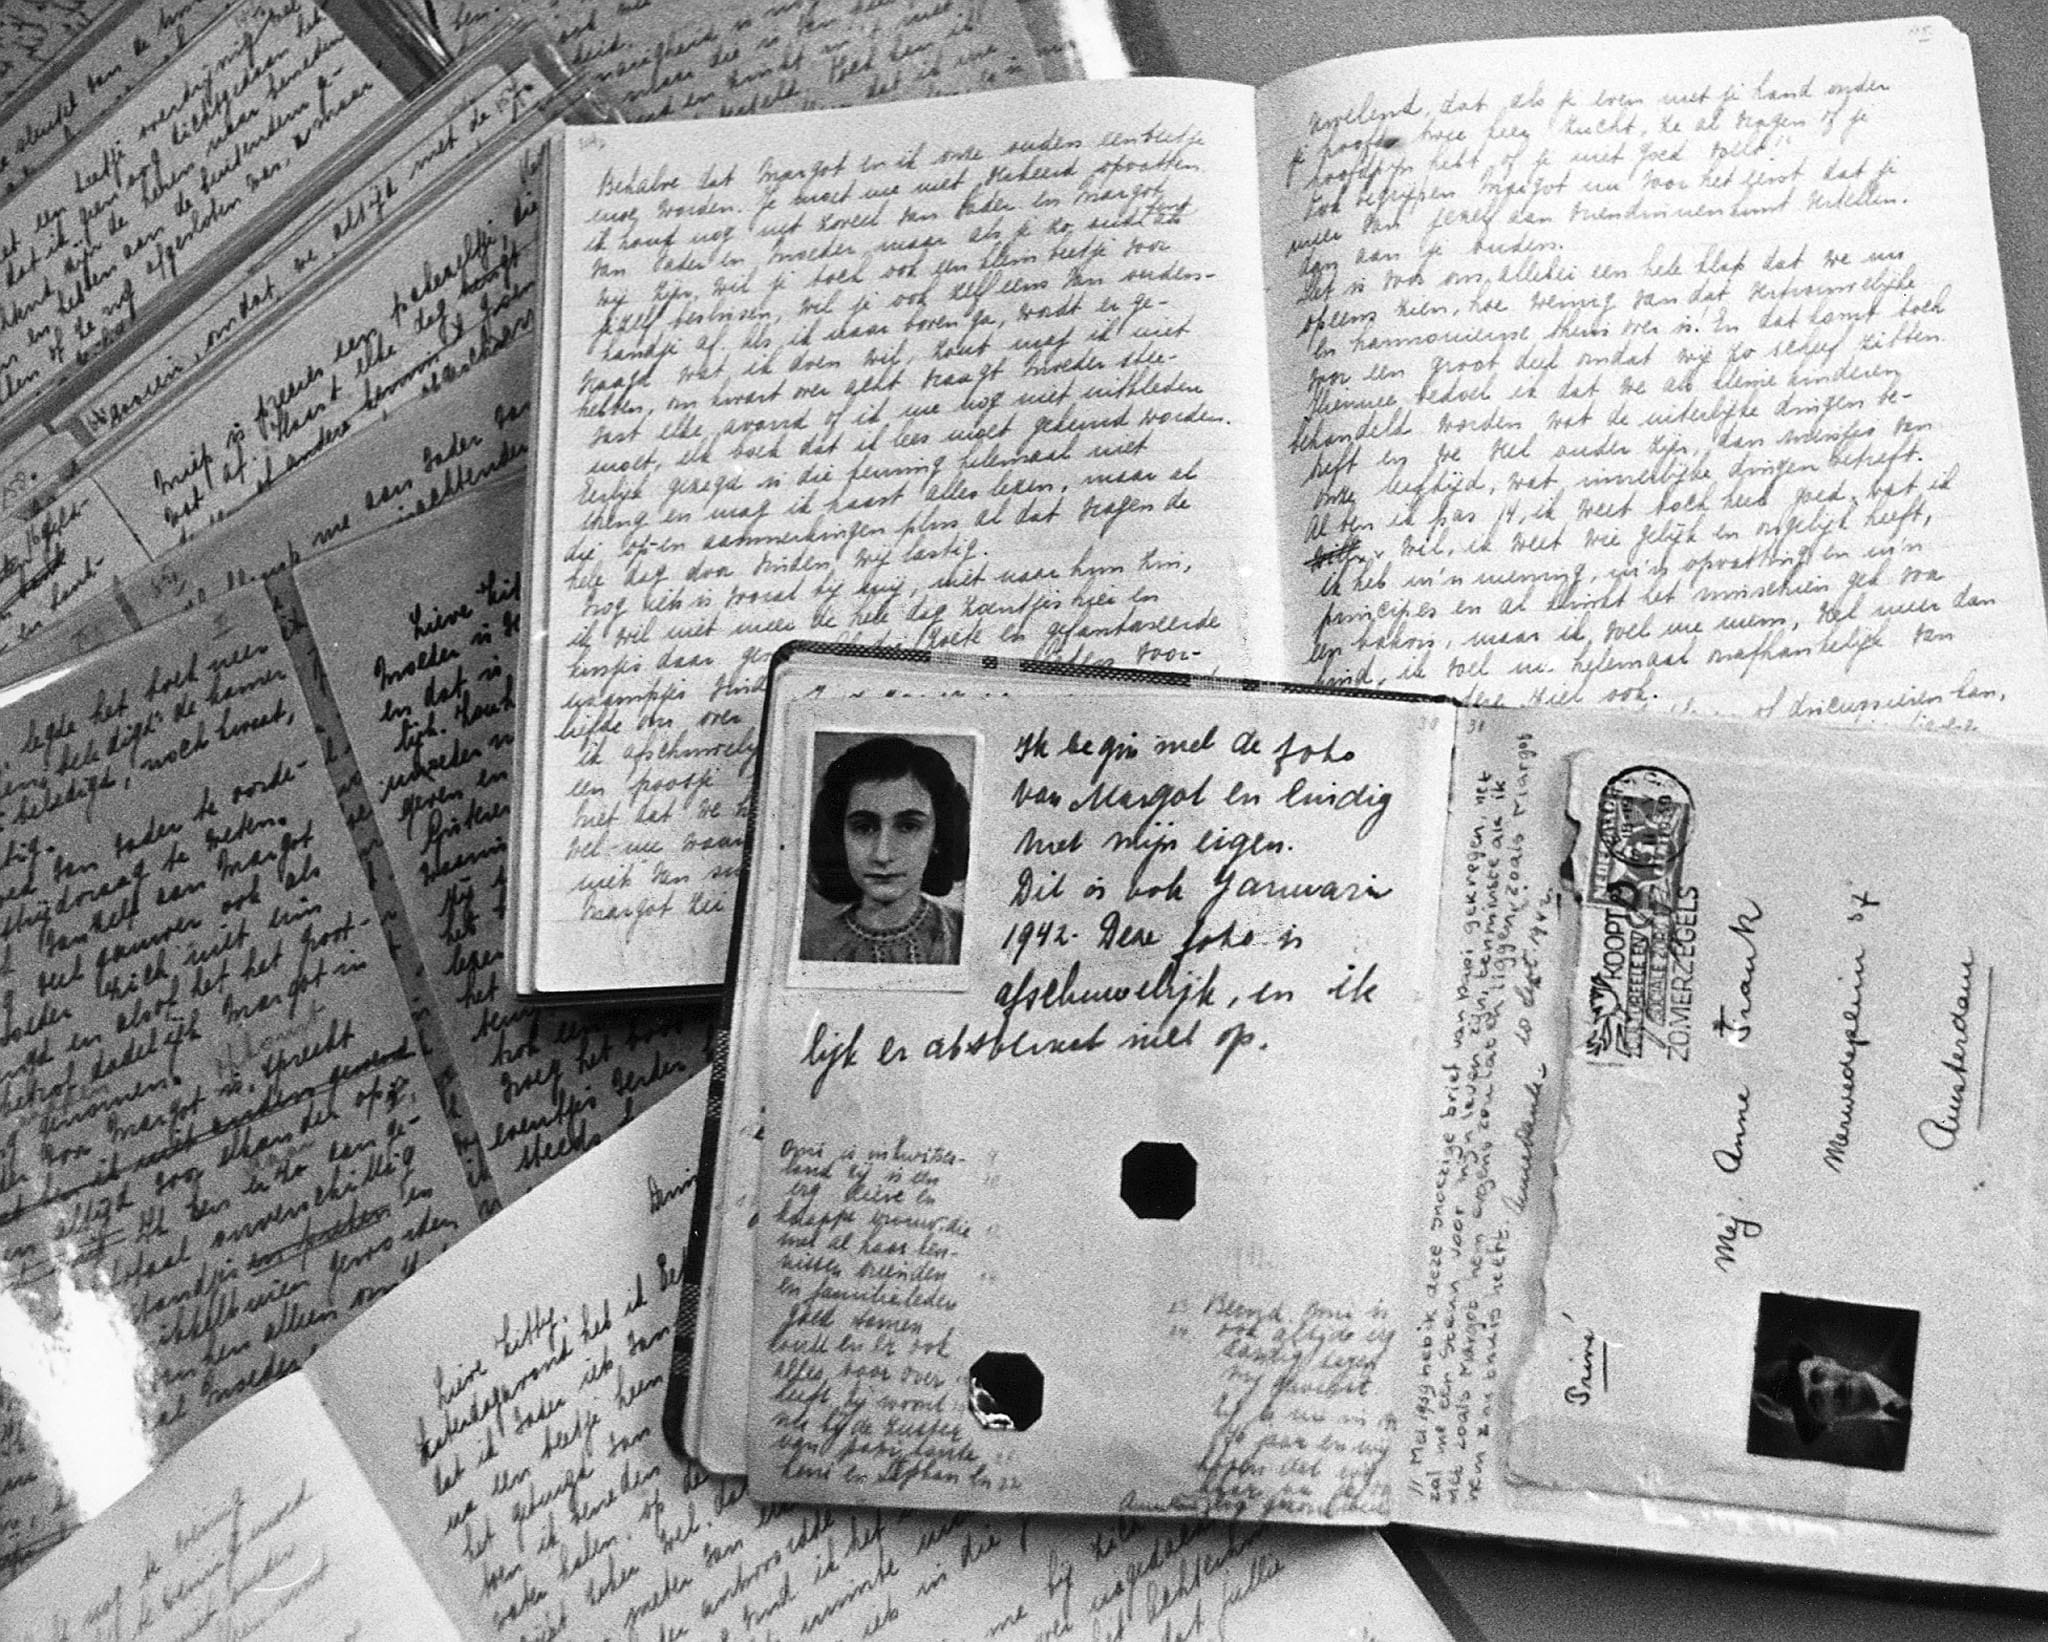 On June 25, 1947, the diary of Anne Frank appeared for the first time with a circulation of 3,000 copies. 